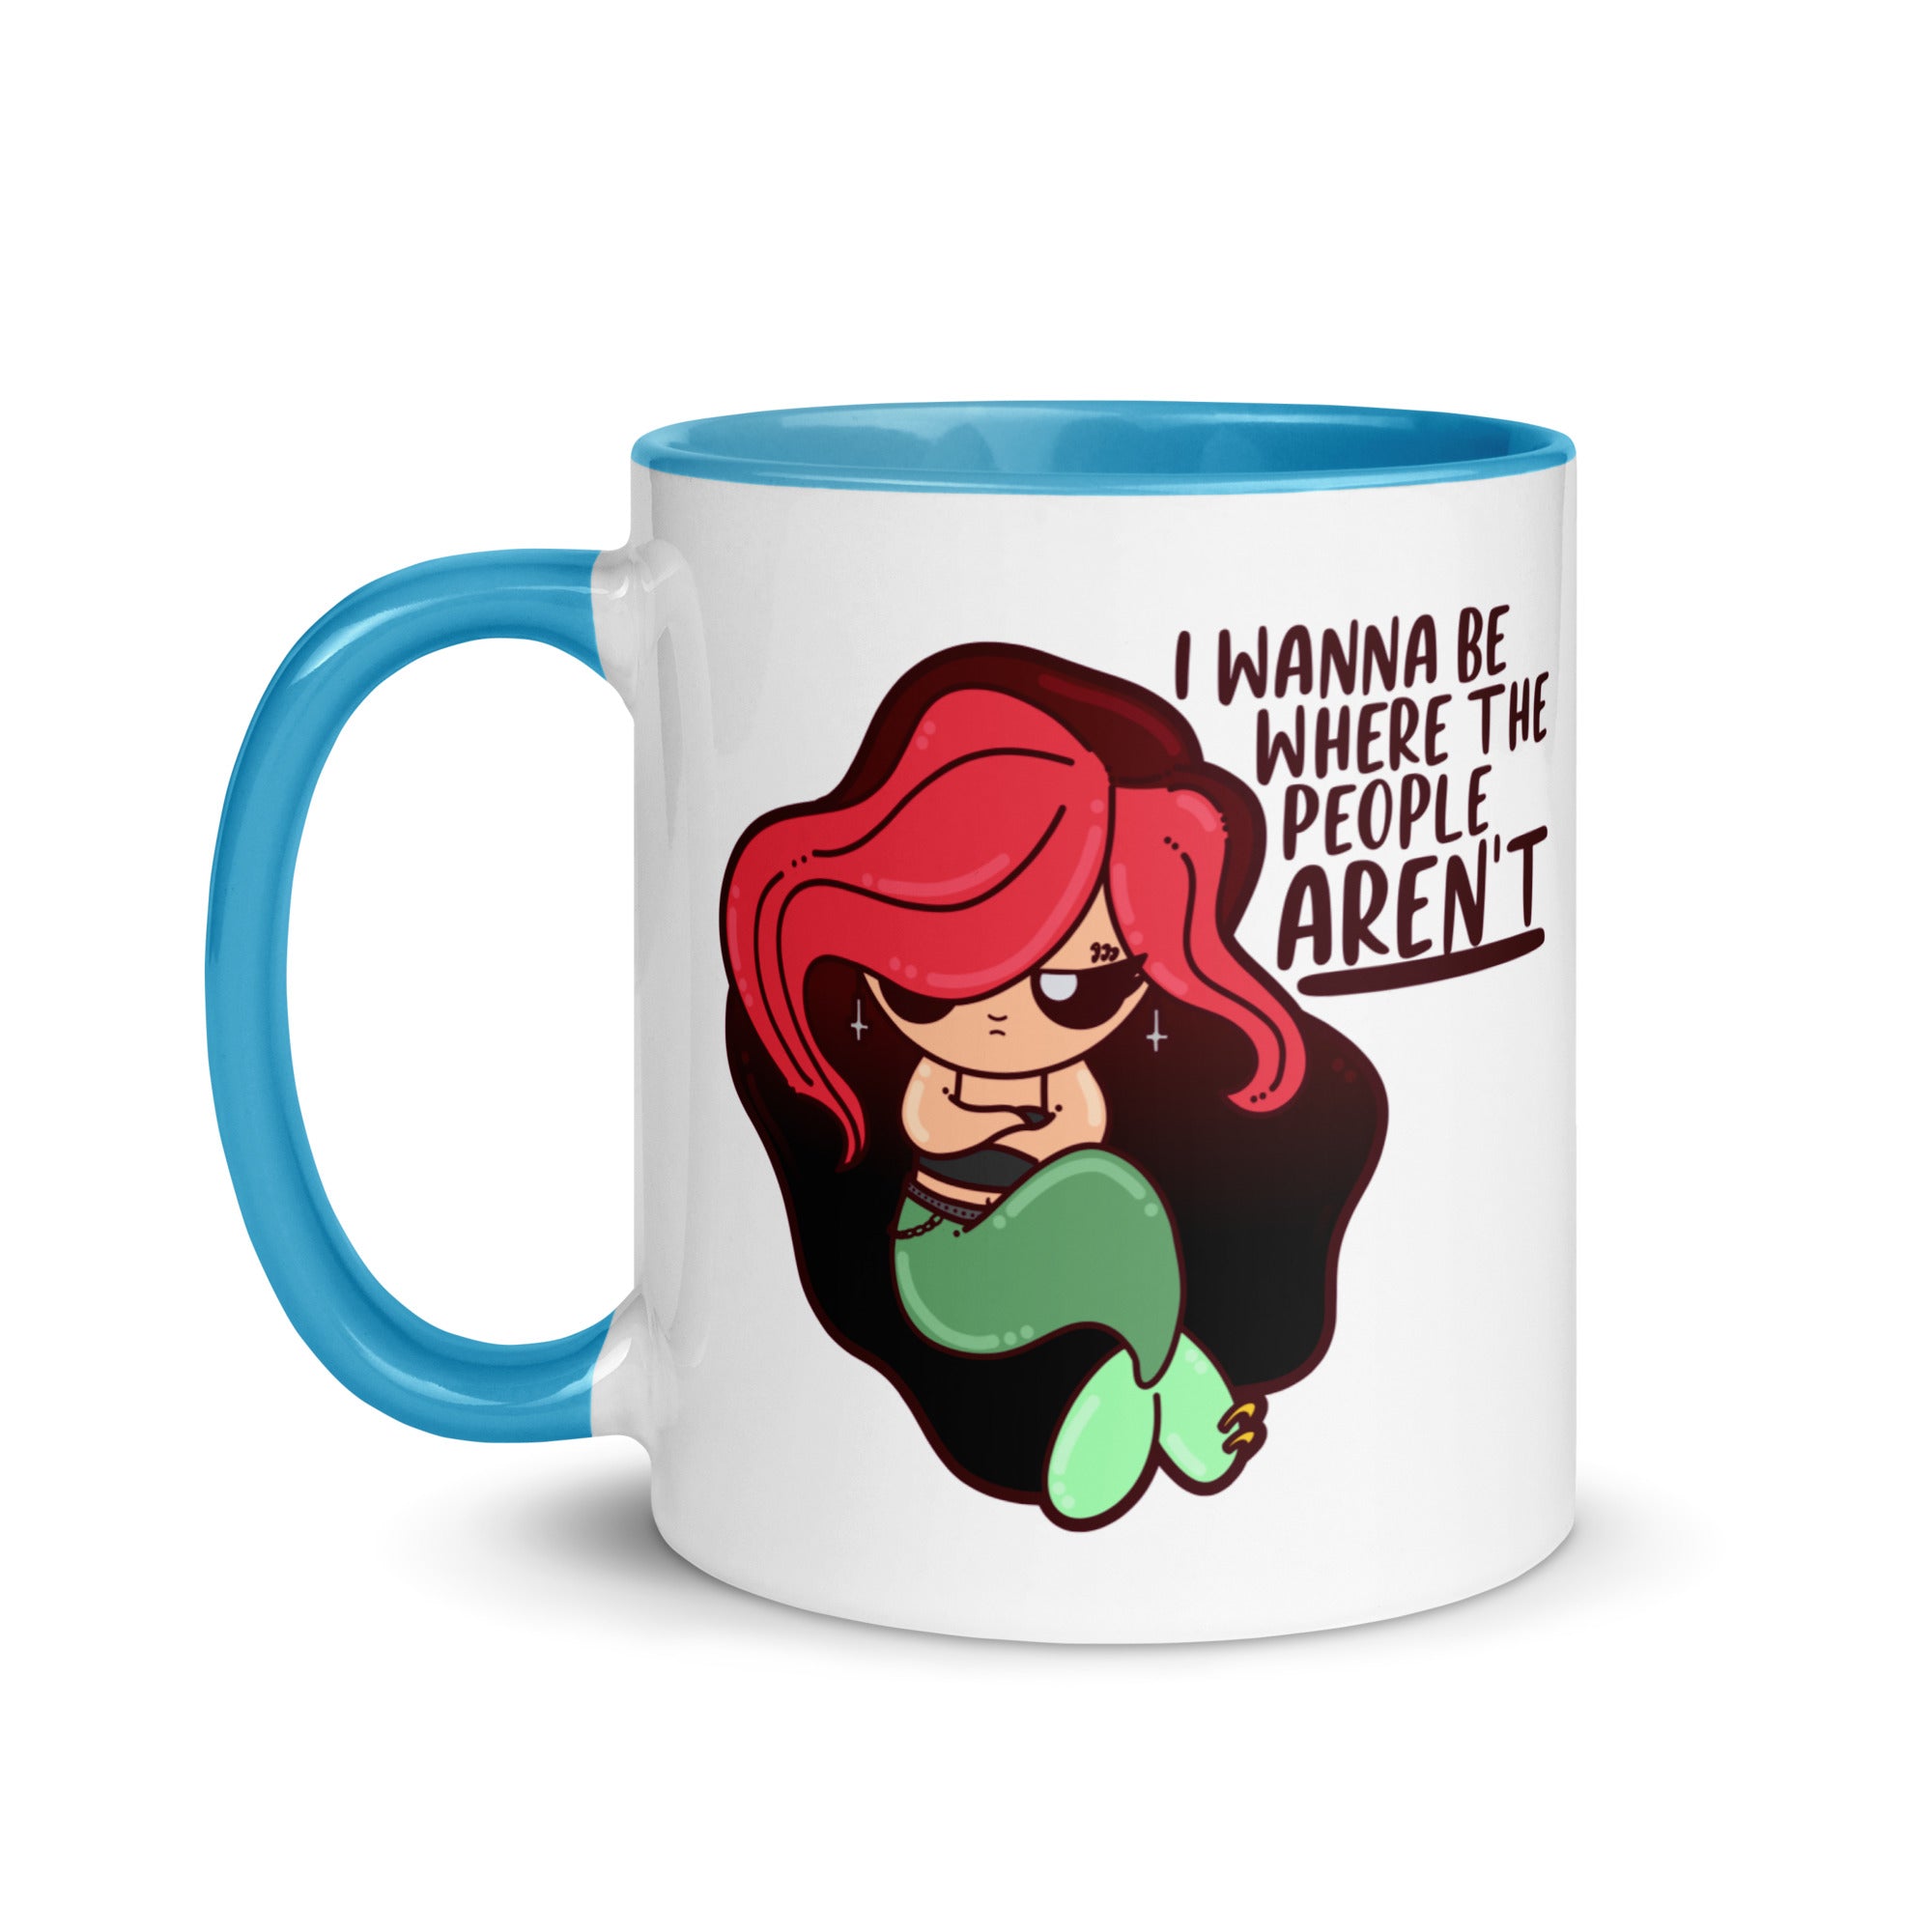 I WANNA BE WHERE THE PEOPLE ARENT - Mug With Color Inside - ChubbleGumLLC